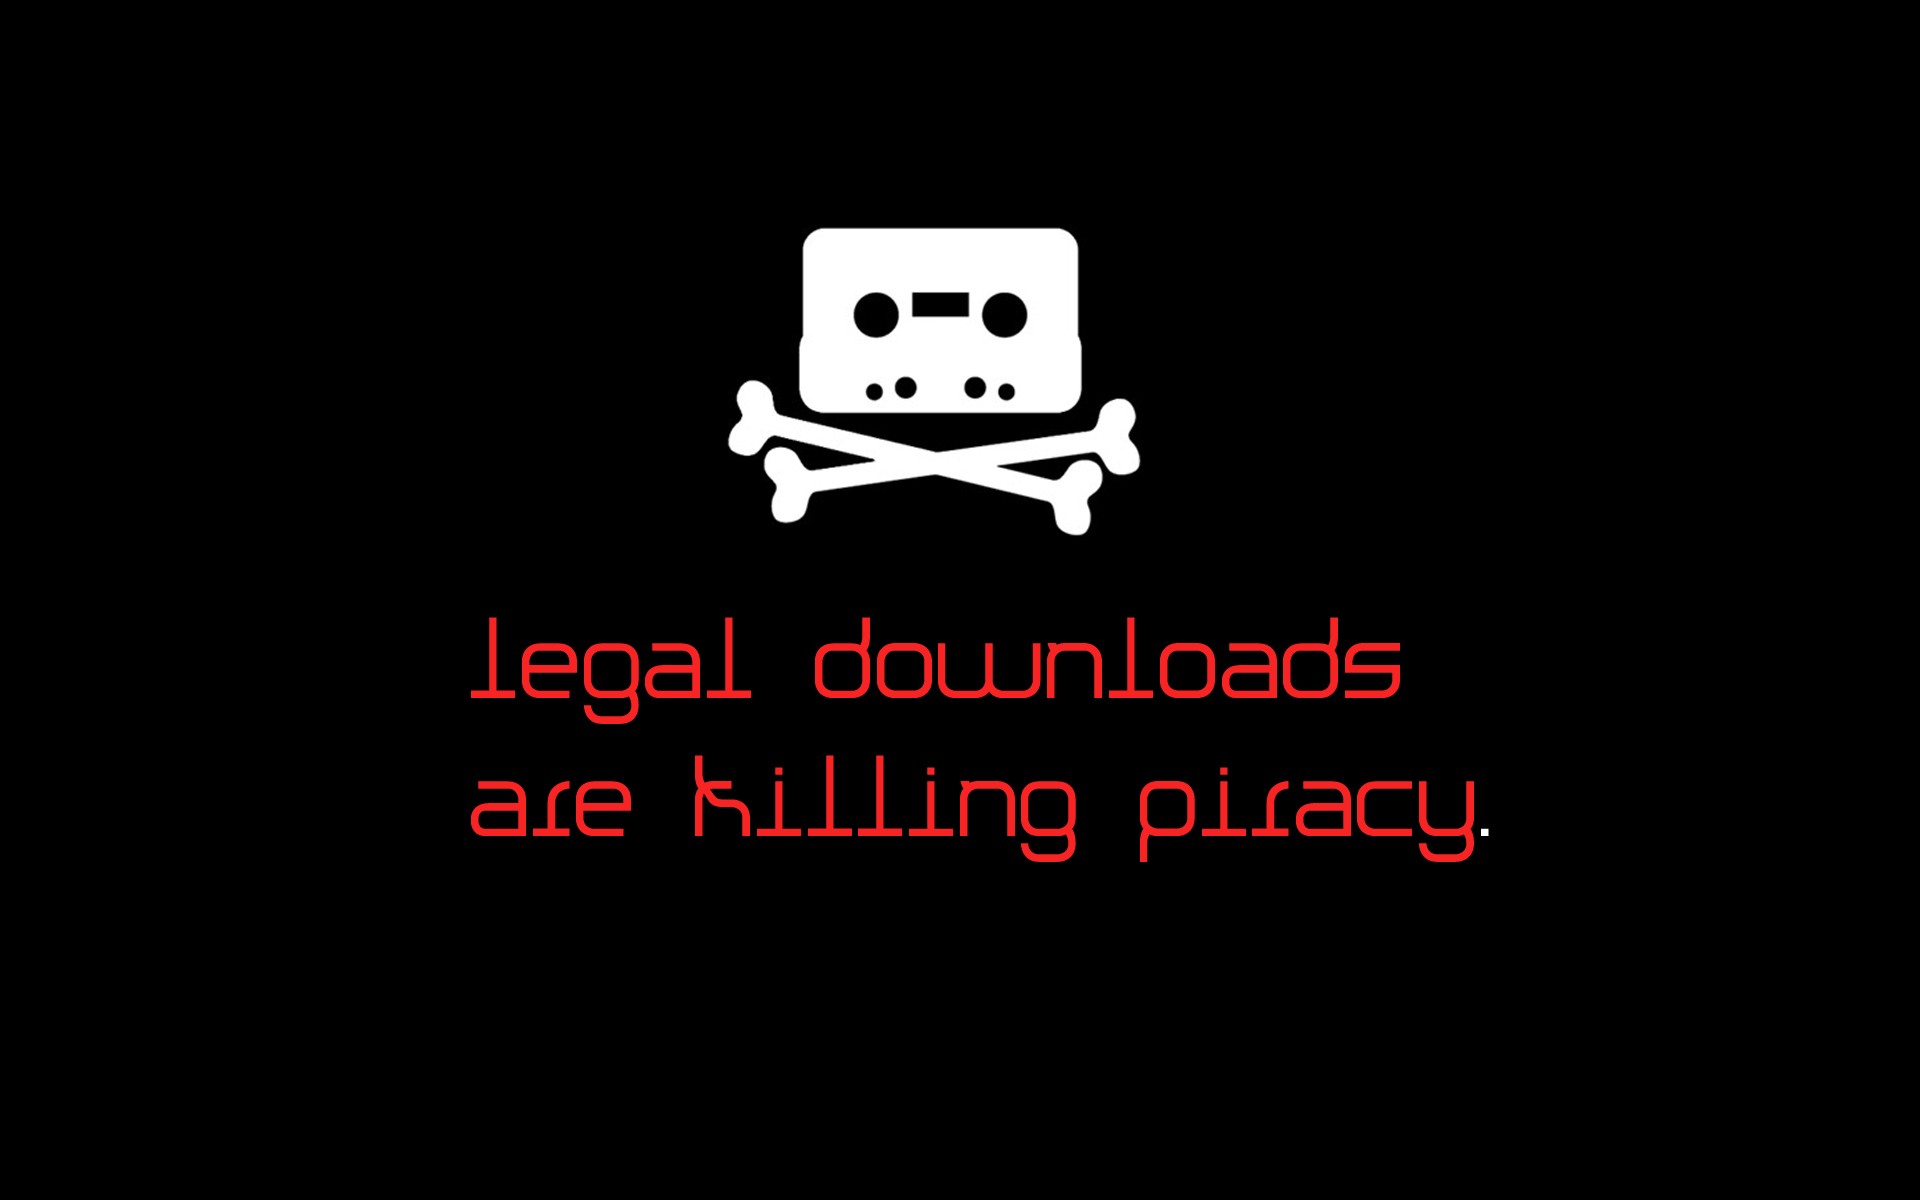 piracy, Computer, Typography Wallpaper